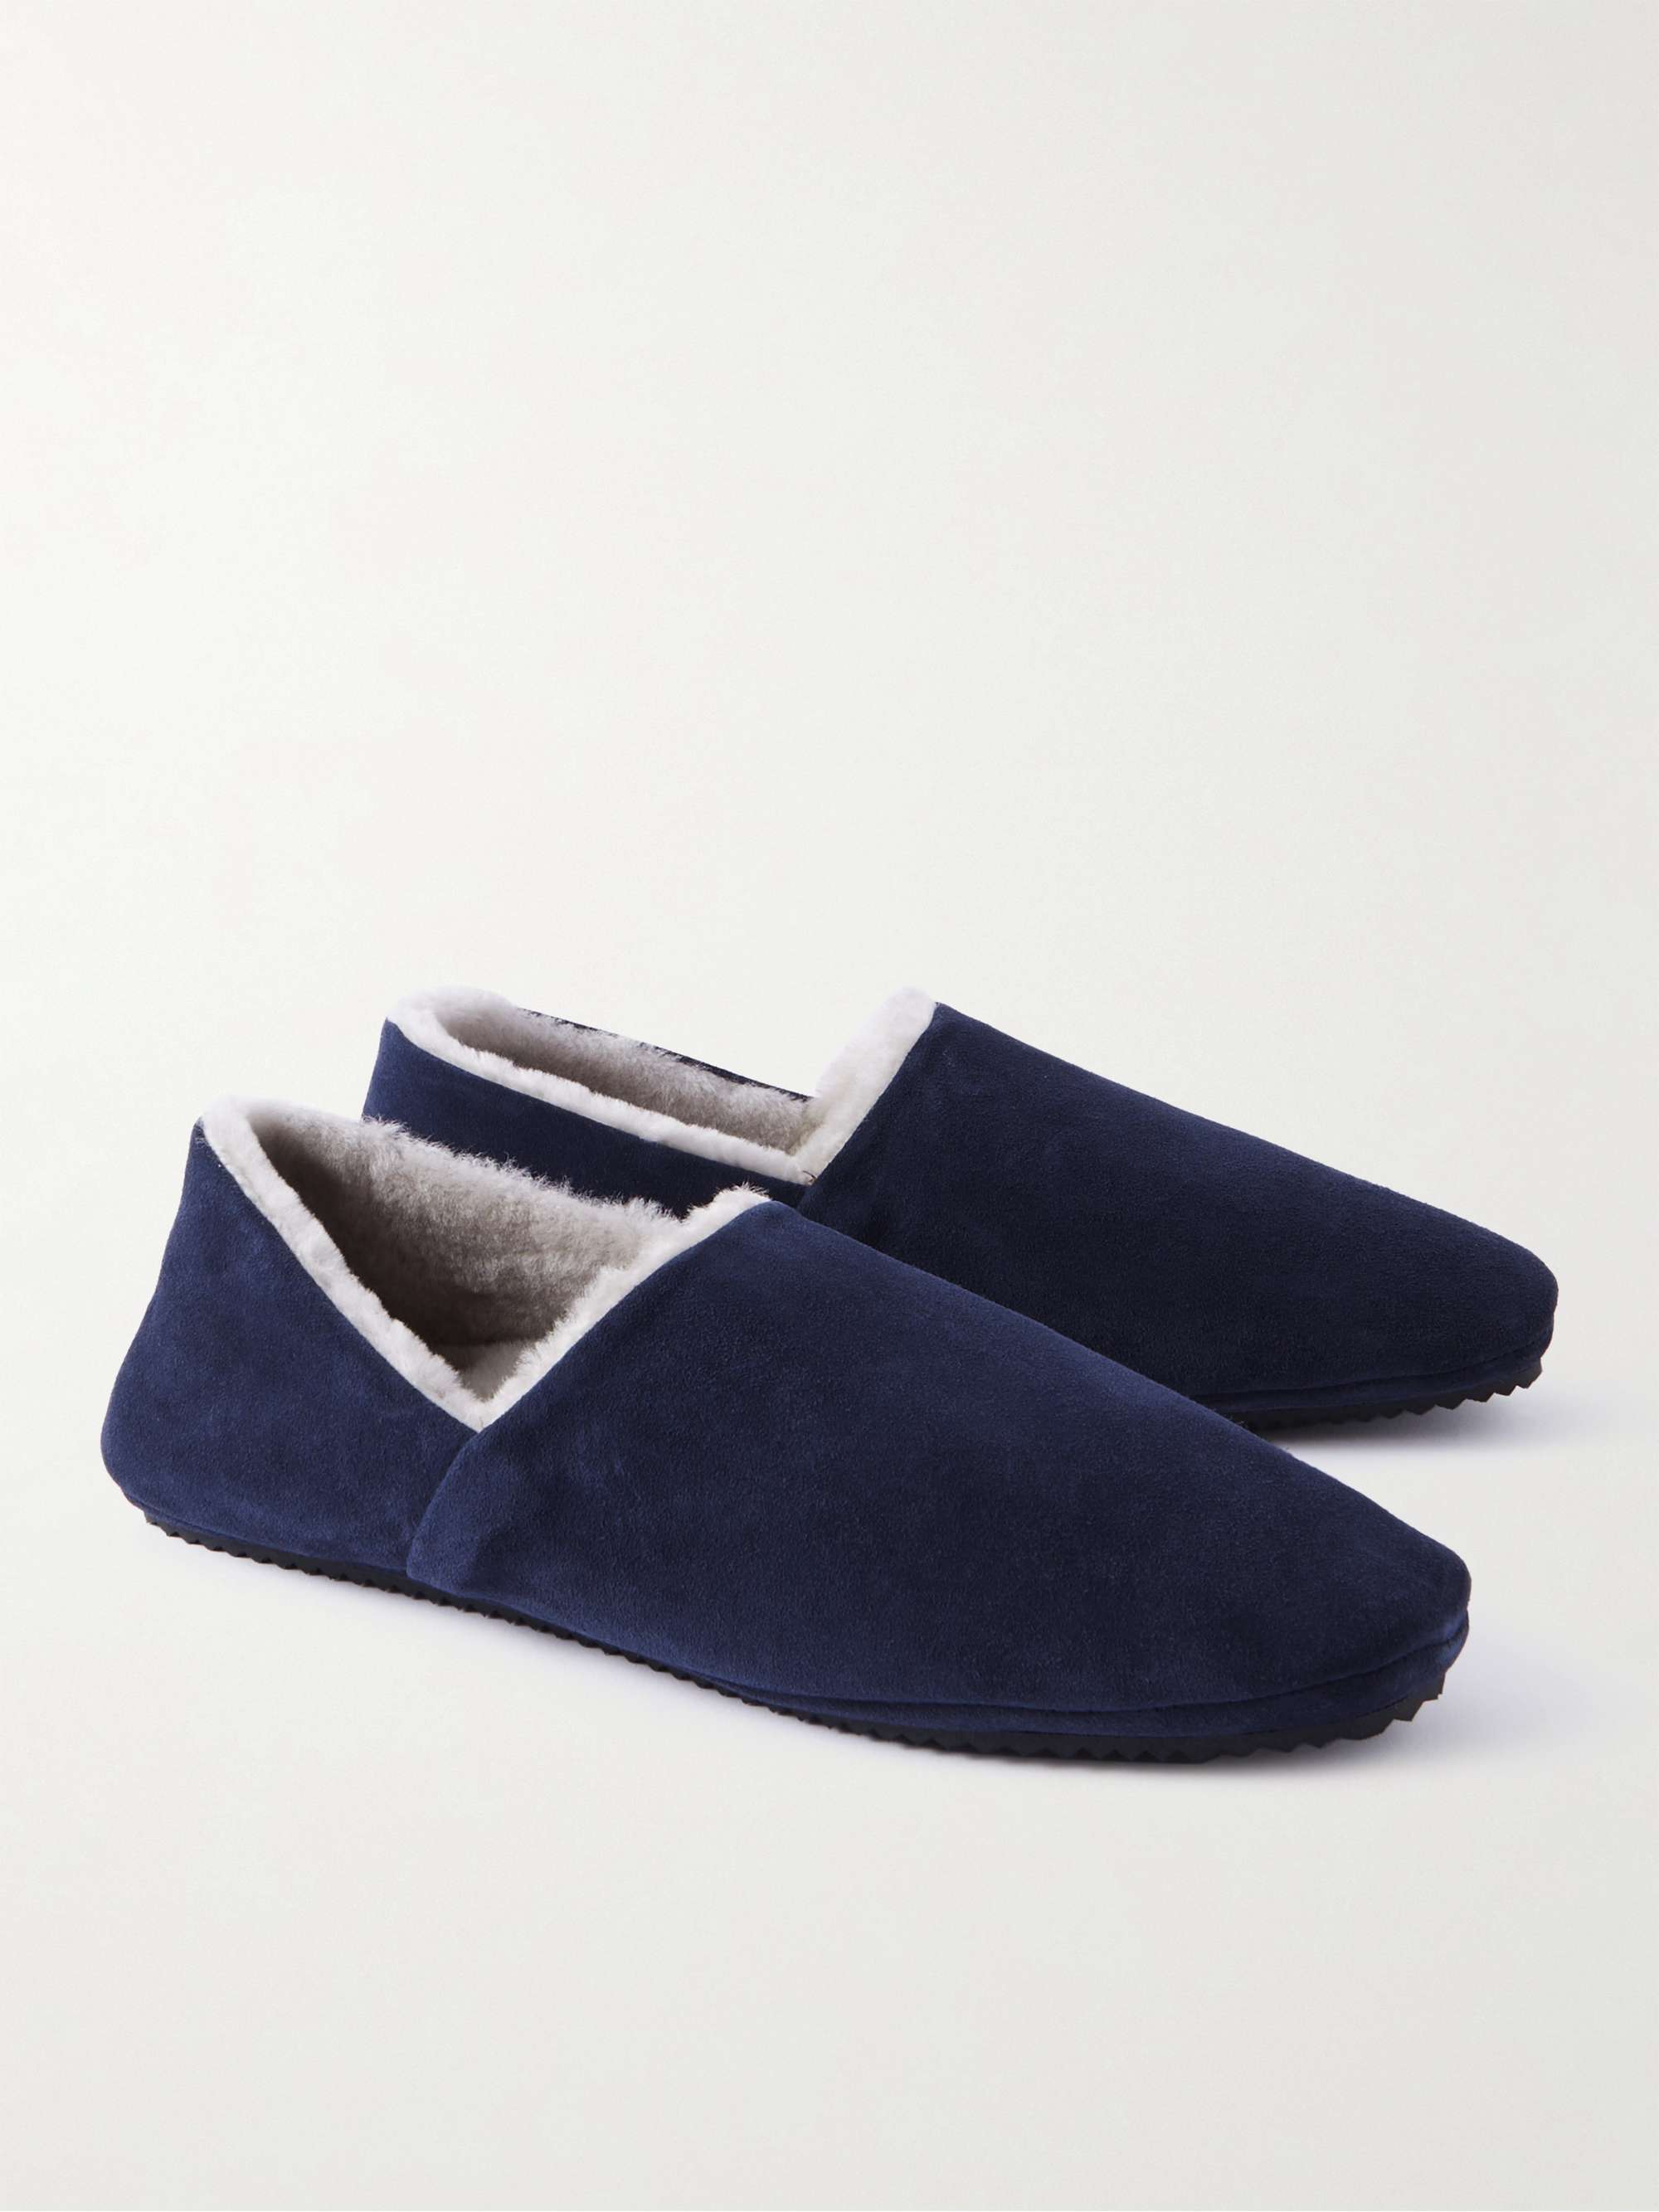 Navy Shearling-Lined Suede Slippers | MR P. | MR PORTER